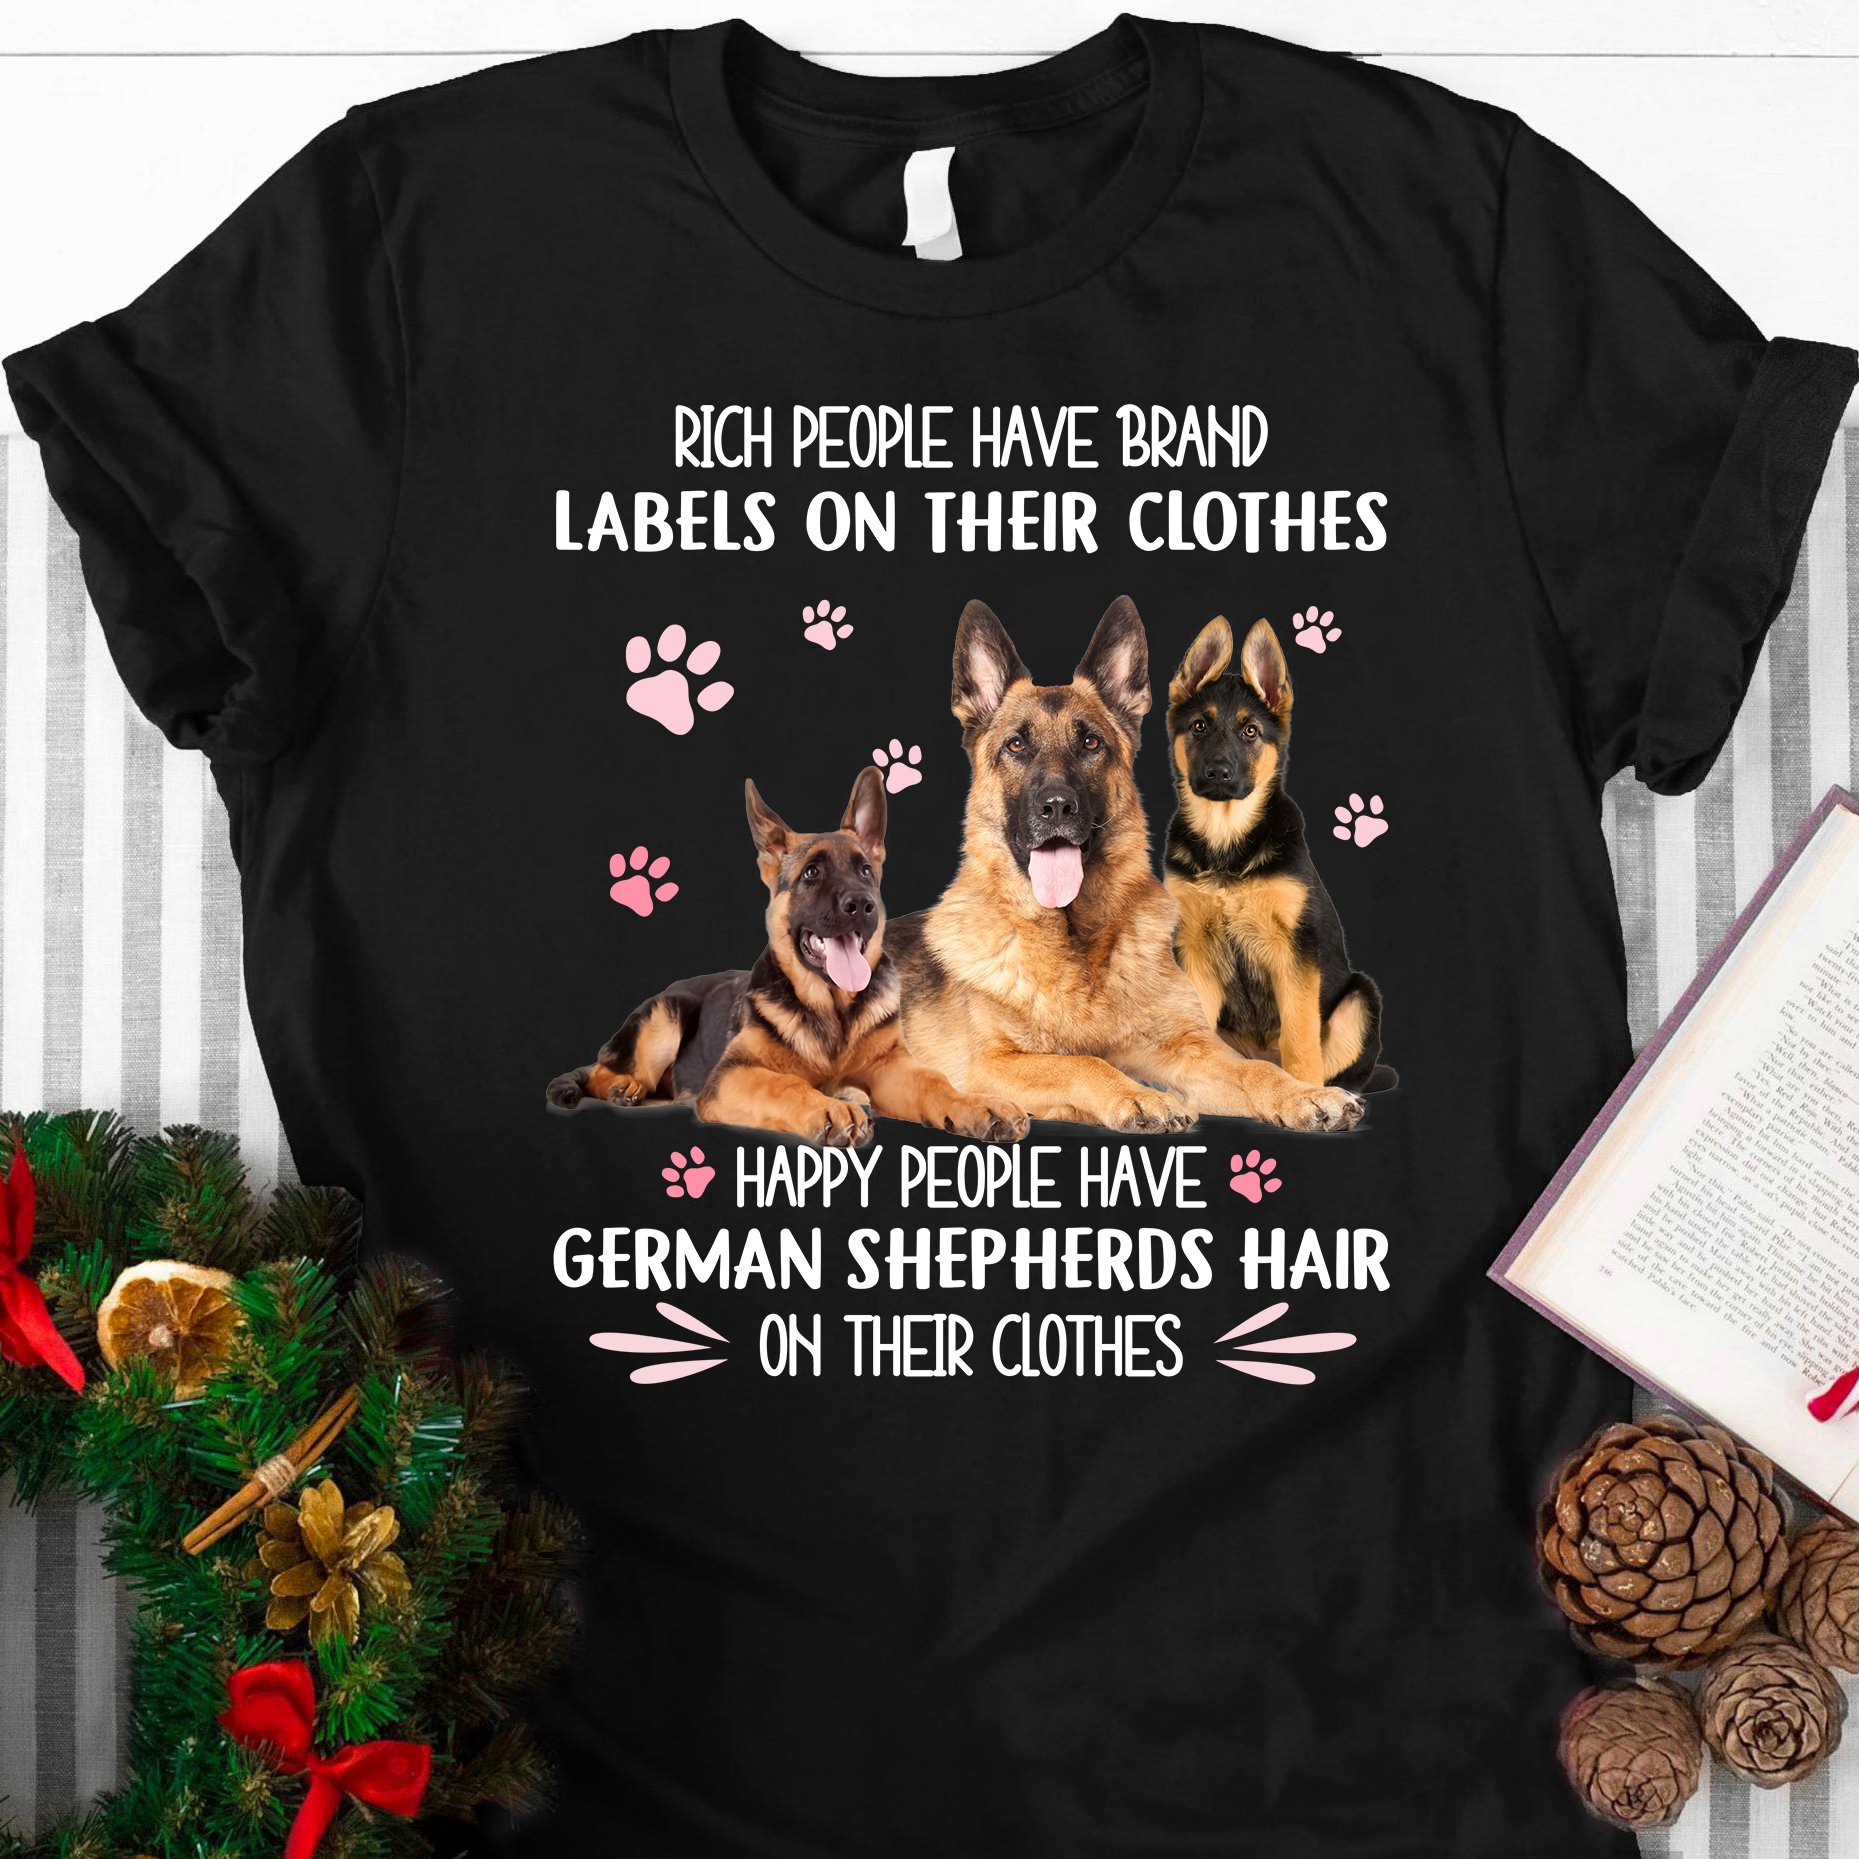 Rich people have brand labels on their clothes happy people have german shepherds hair on their clothes